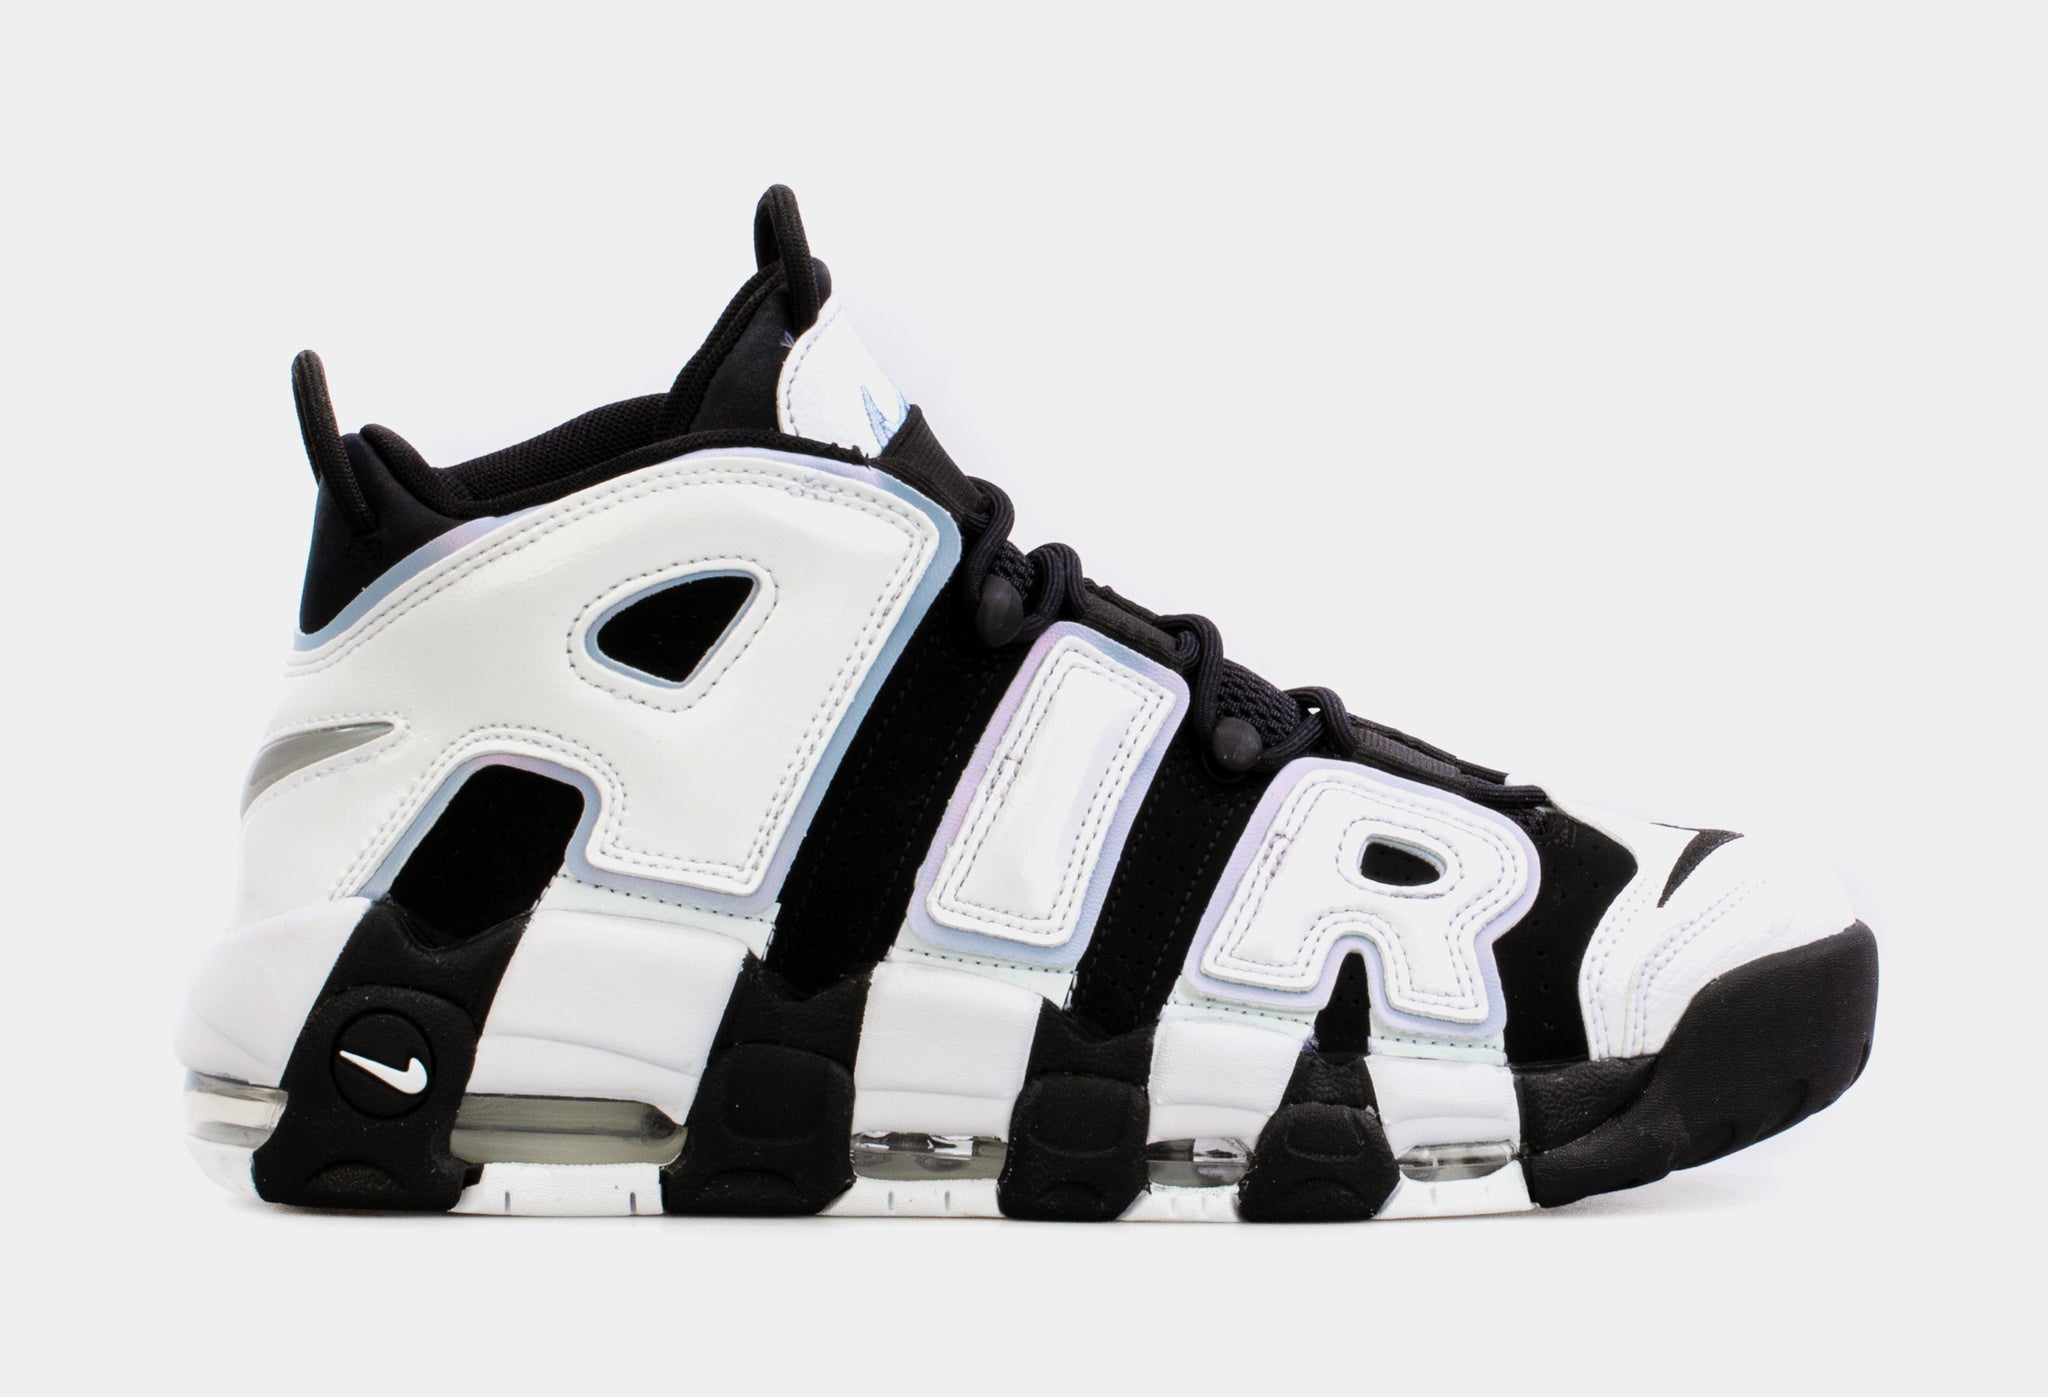 ON FOOT” NIKE AIR MORE UPTEMPO '96 (BLACK/ACTION GRAPE) 